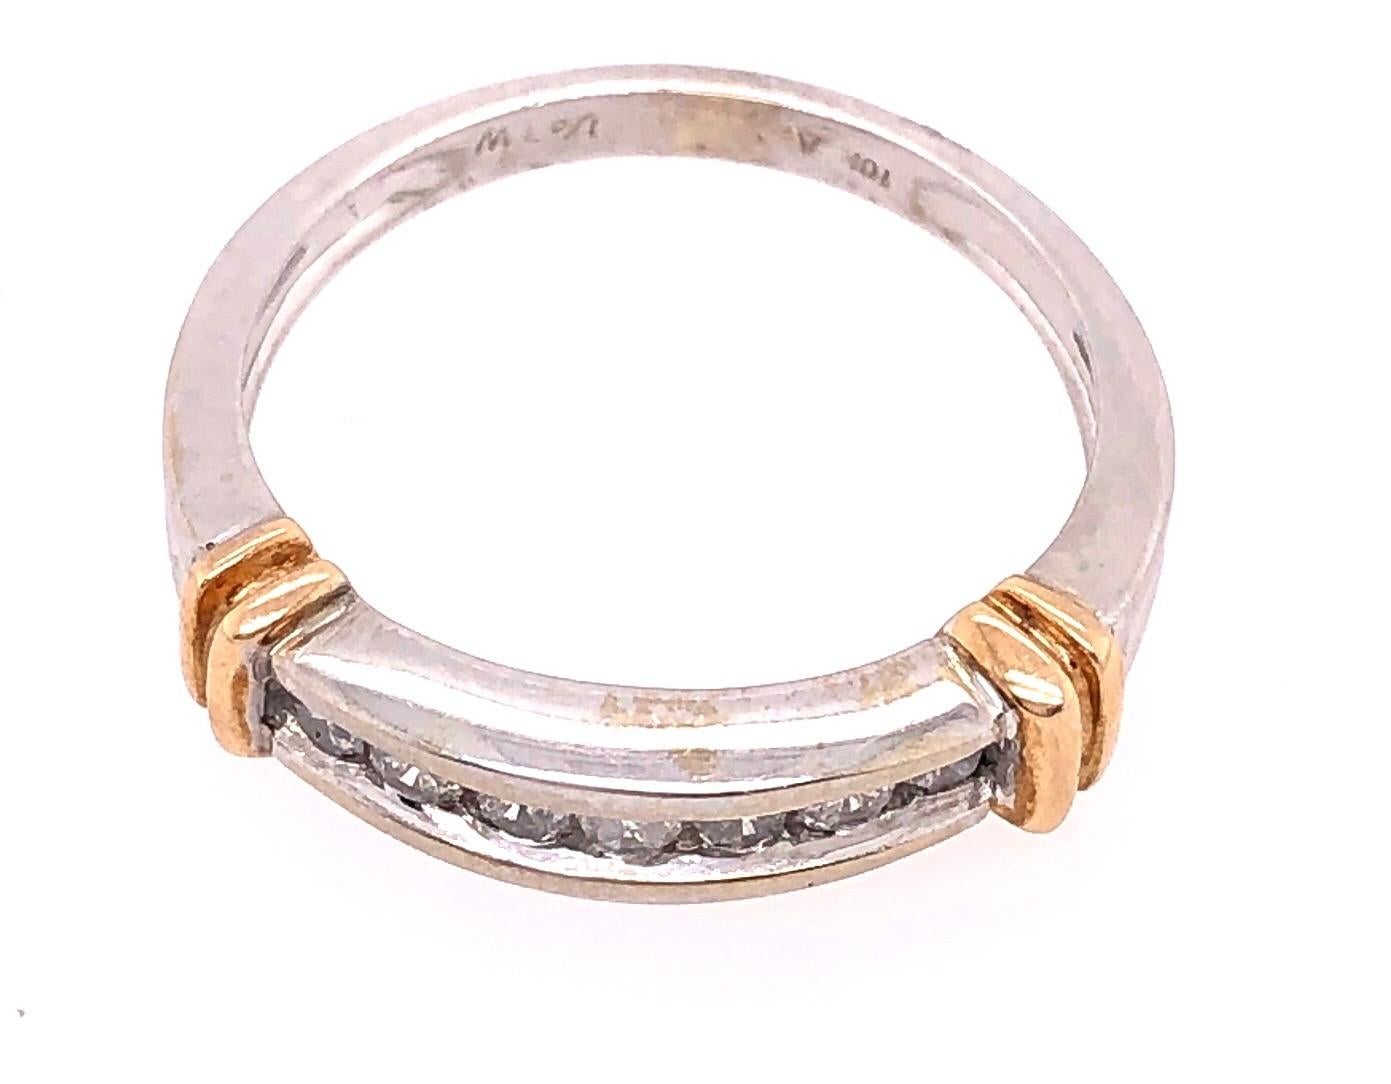 14 Karat Two Tone Gold Band Ring with Diamonds 0.25 Total Diamond Weight.
Size 7
3.3 grams total weight.